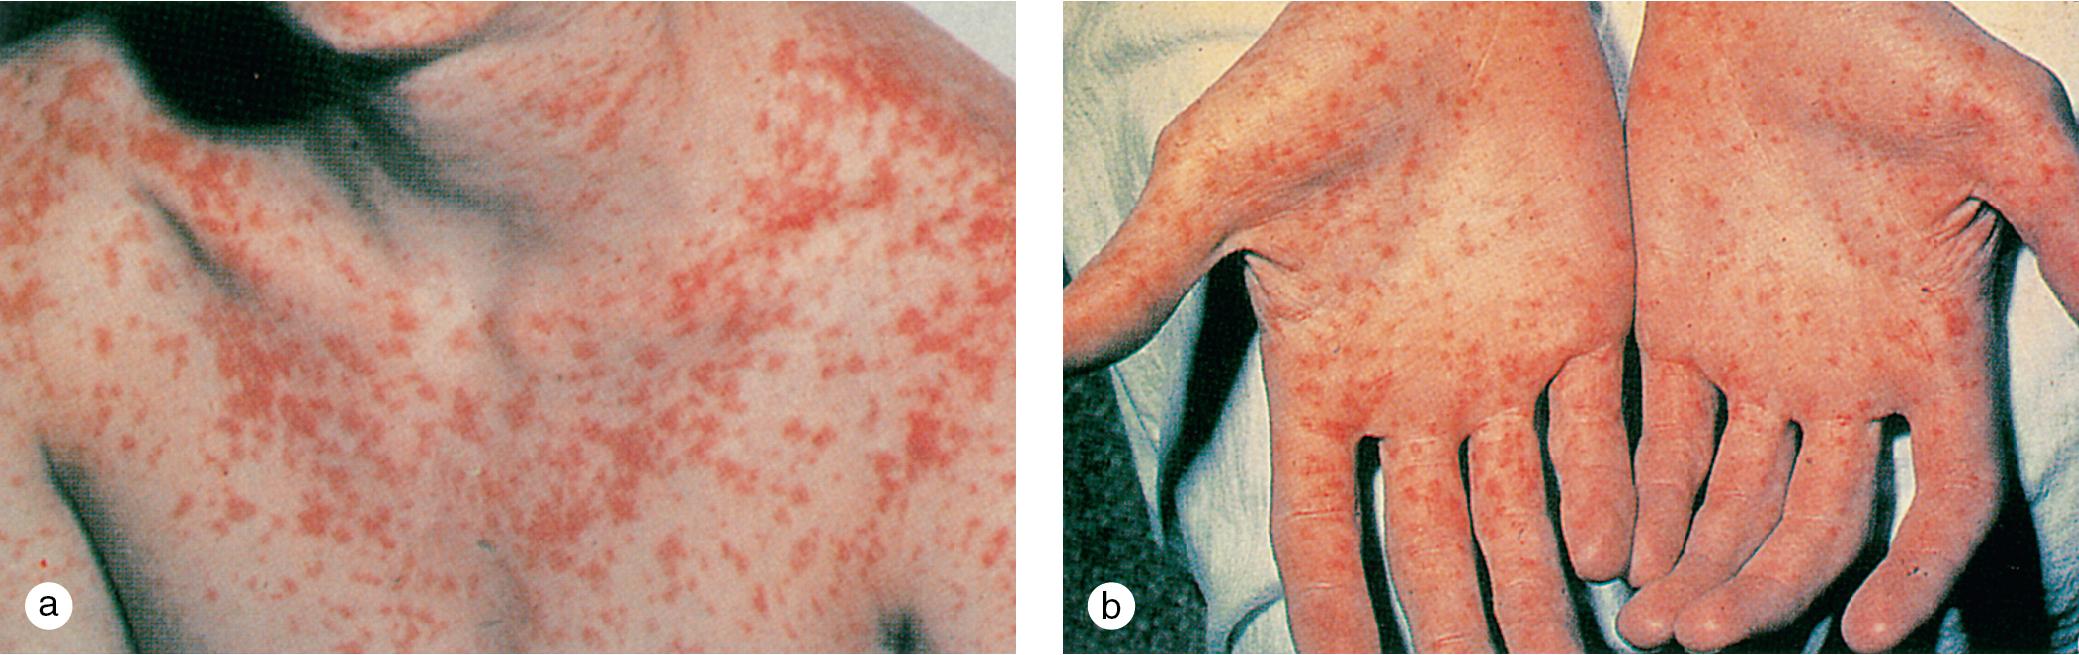 Fig. 7.12, The measles exanthem. (a) A blotchy, erythematous, blanching eruption appears at the hairline and spreads cephalocaudally over 3 days. (b) Ultimately, the exanthem involves the palms and soles. With evolution, lesions become confluent on the face, neck, and upper trunk.